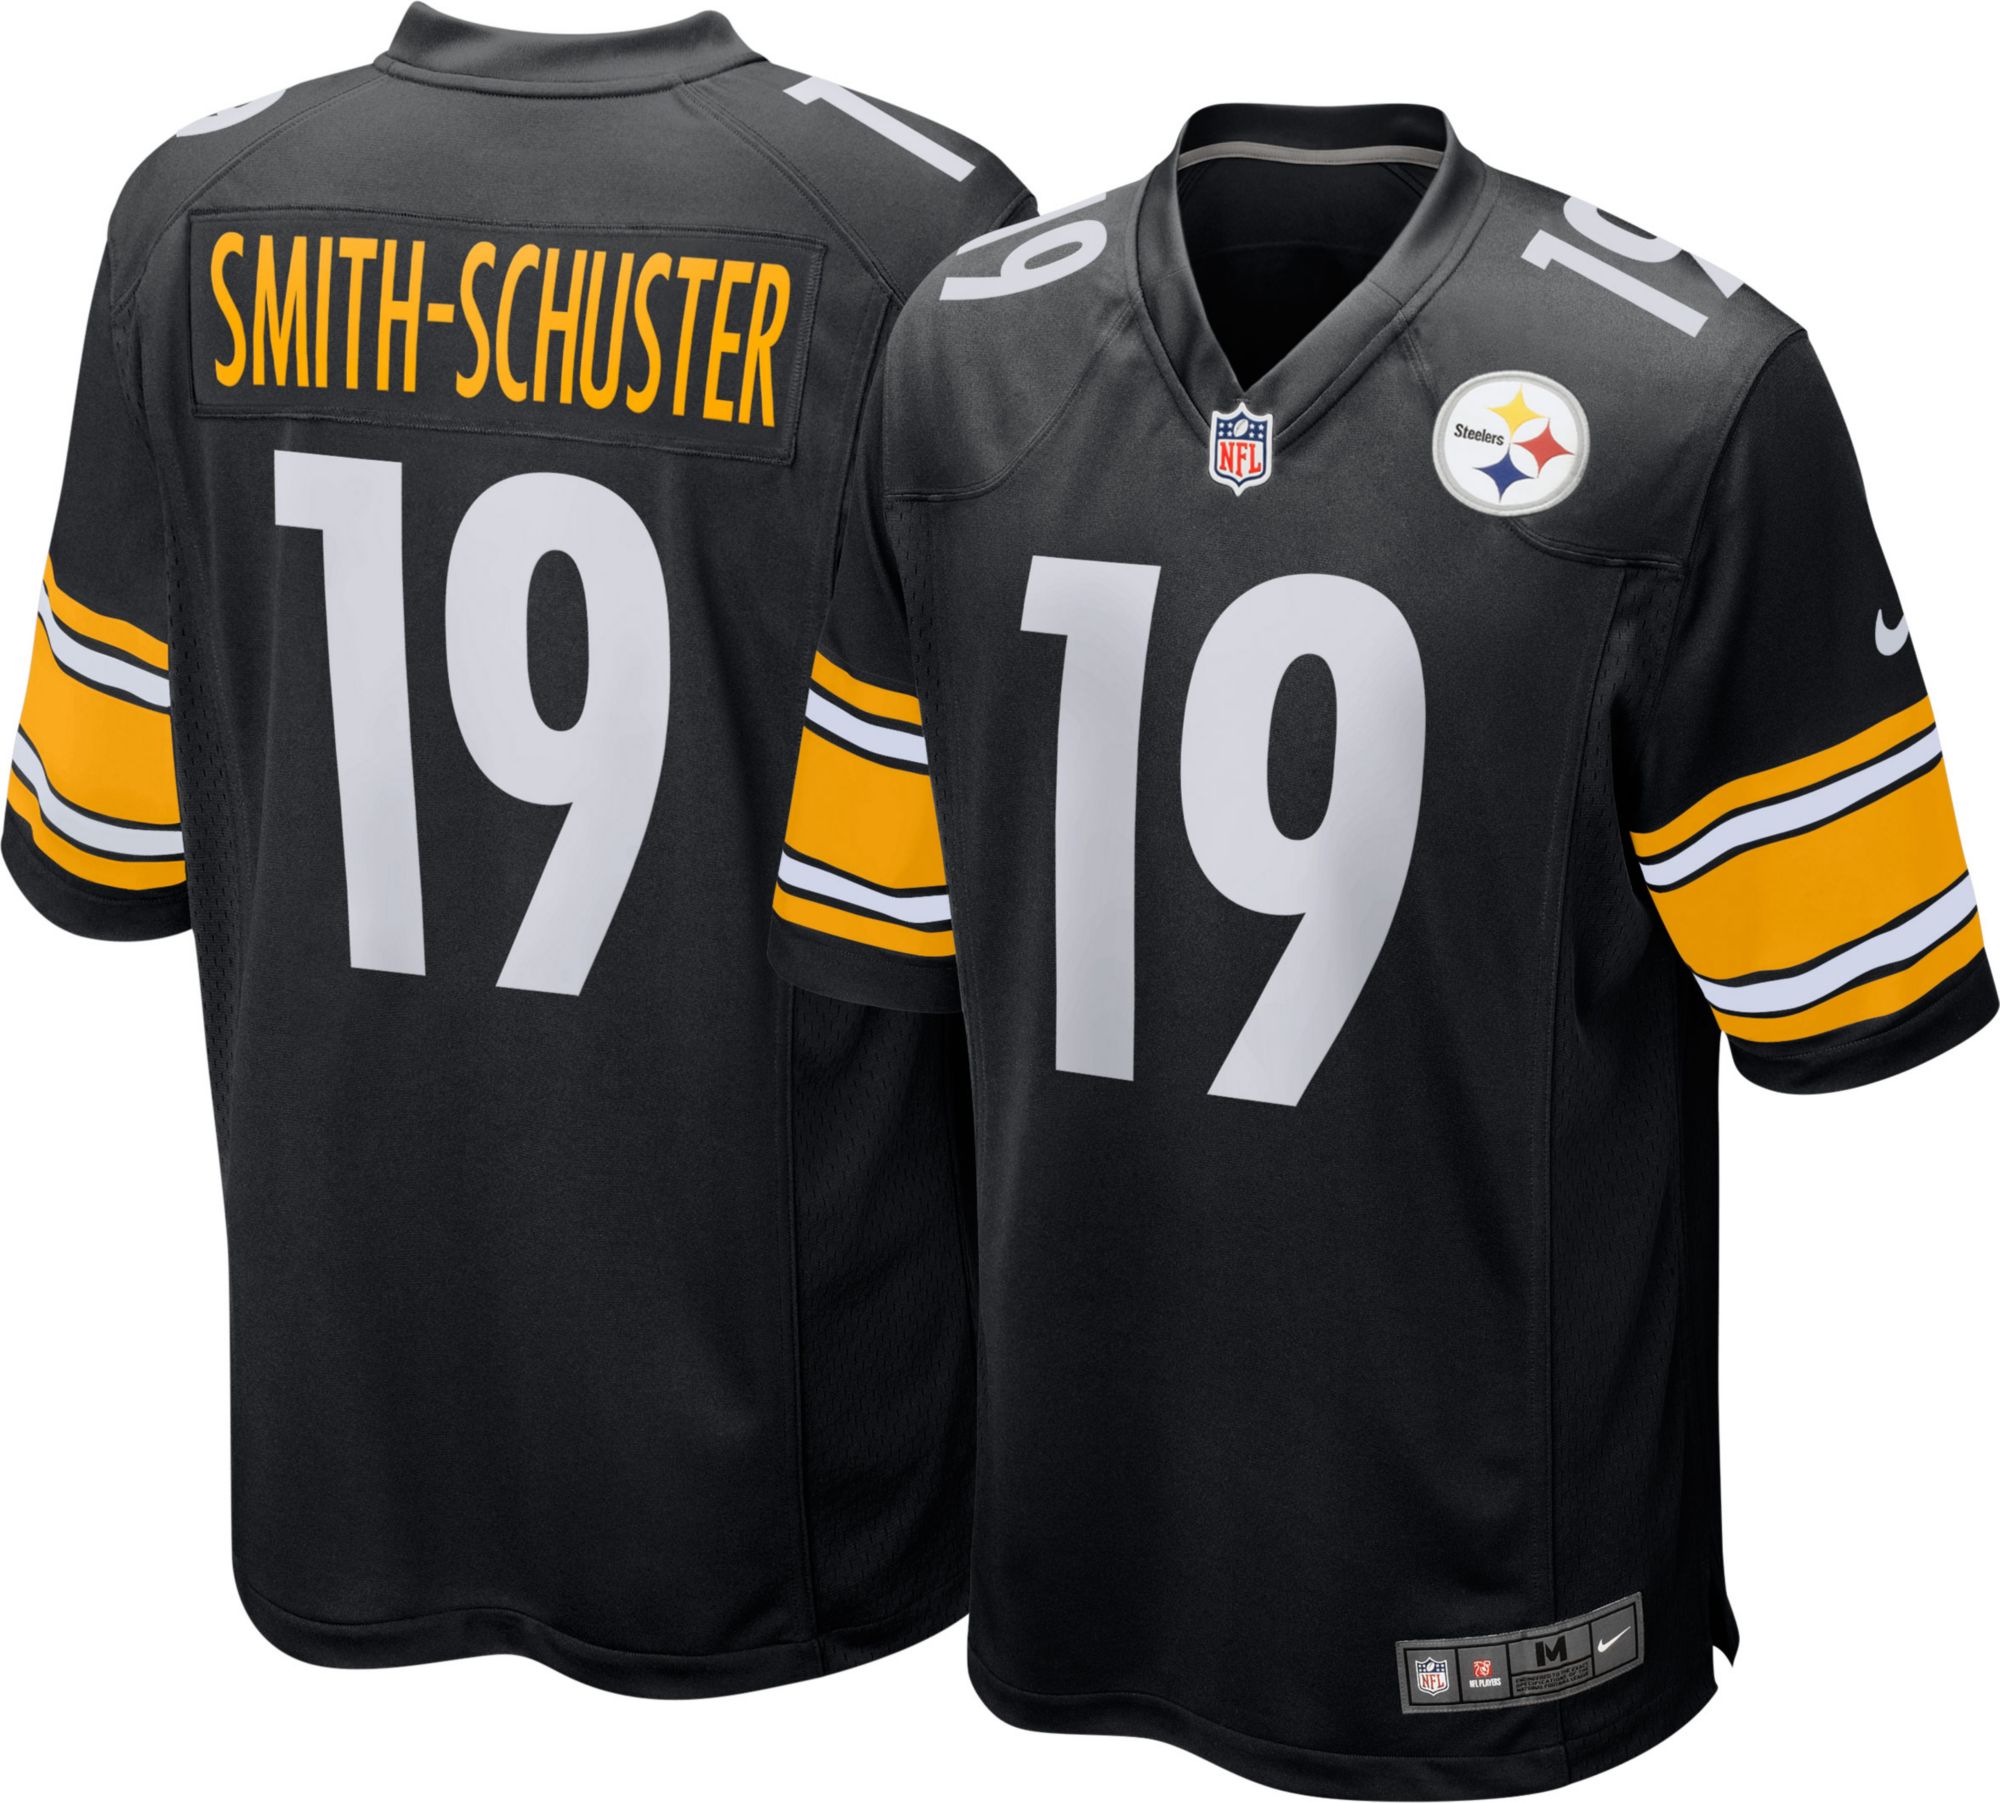 Nike Men's Home Game Jersey Pittsburgh 